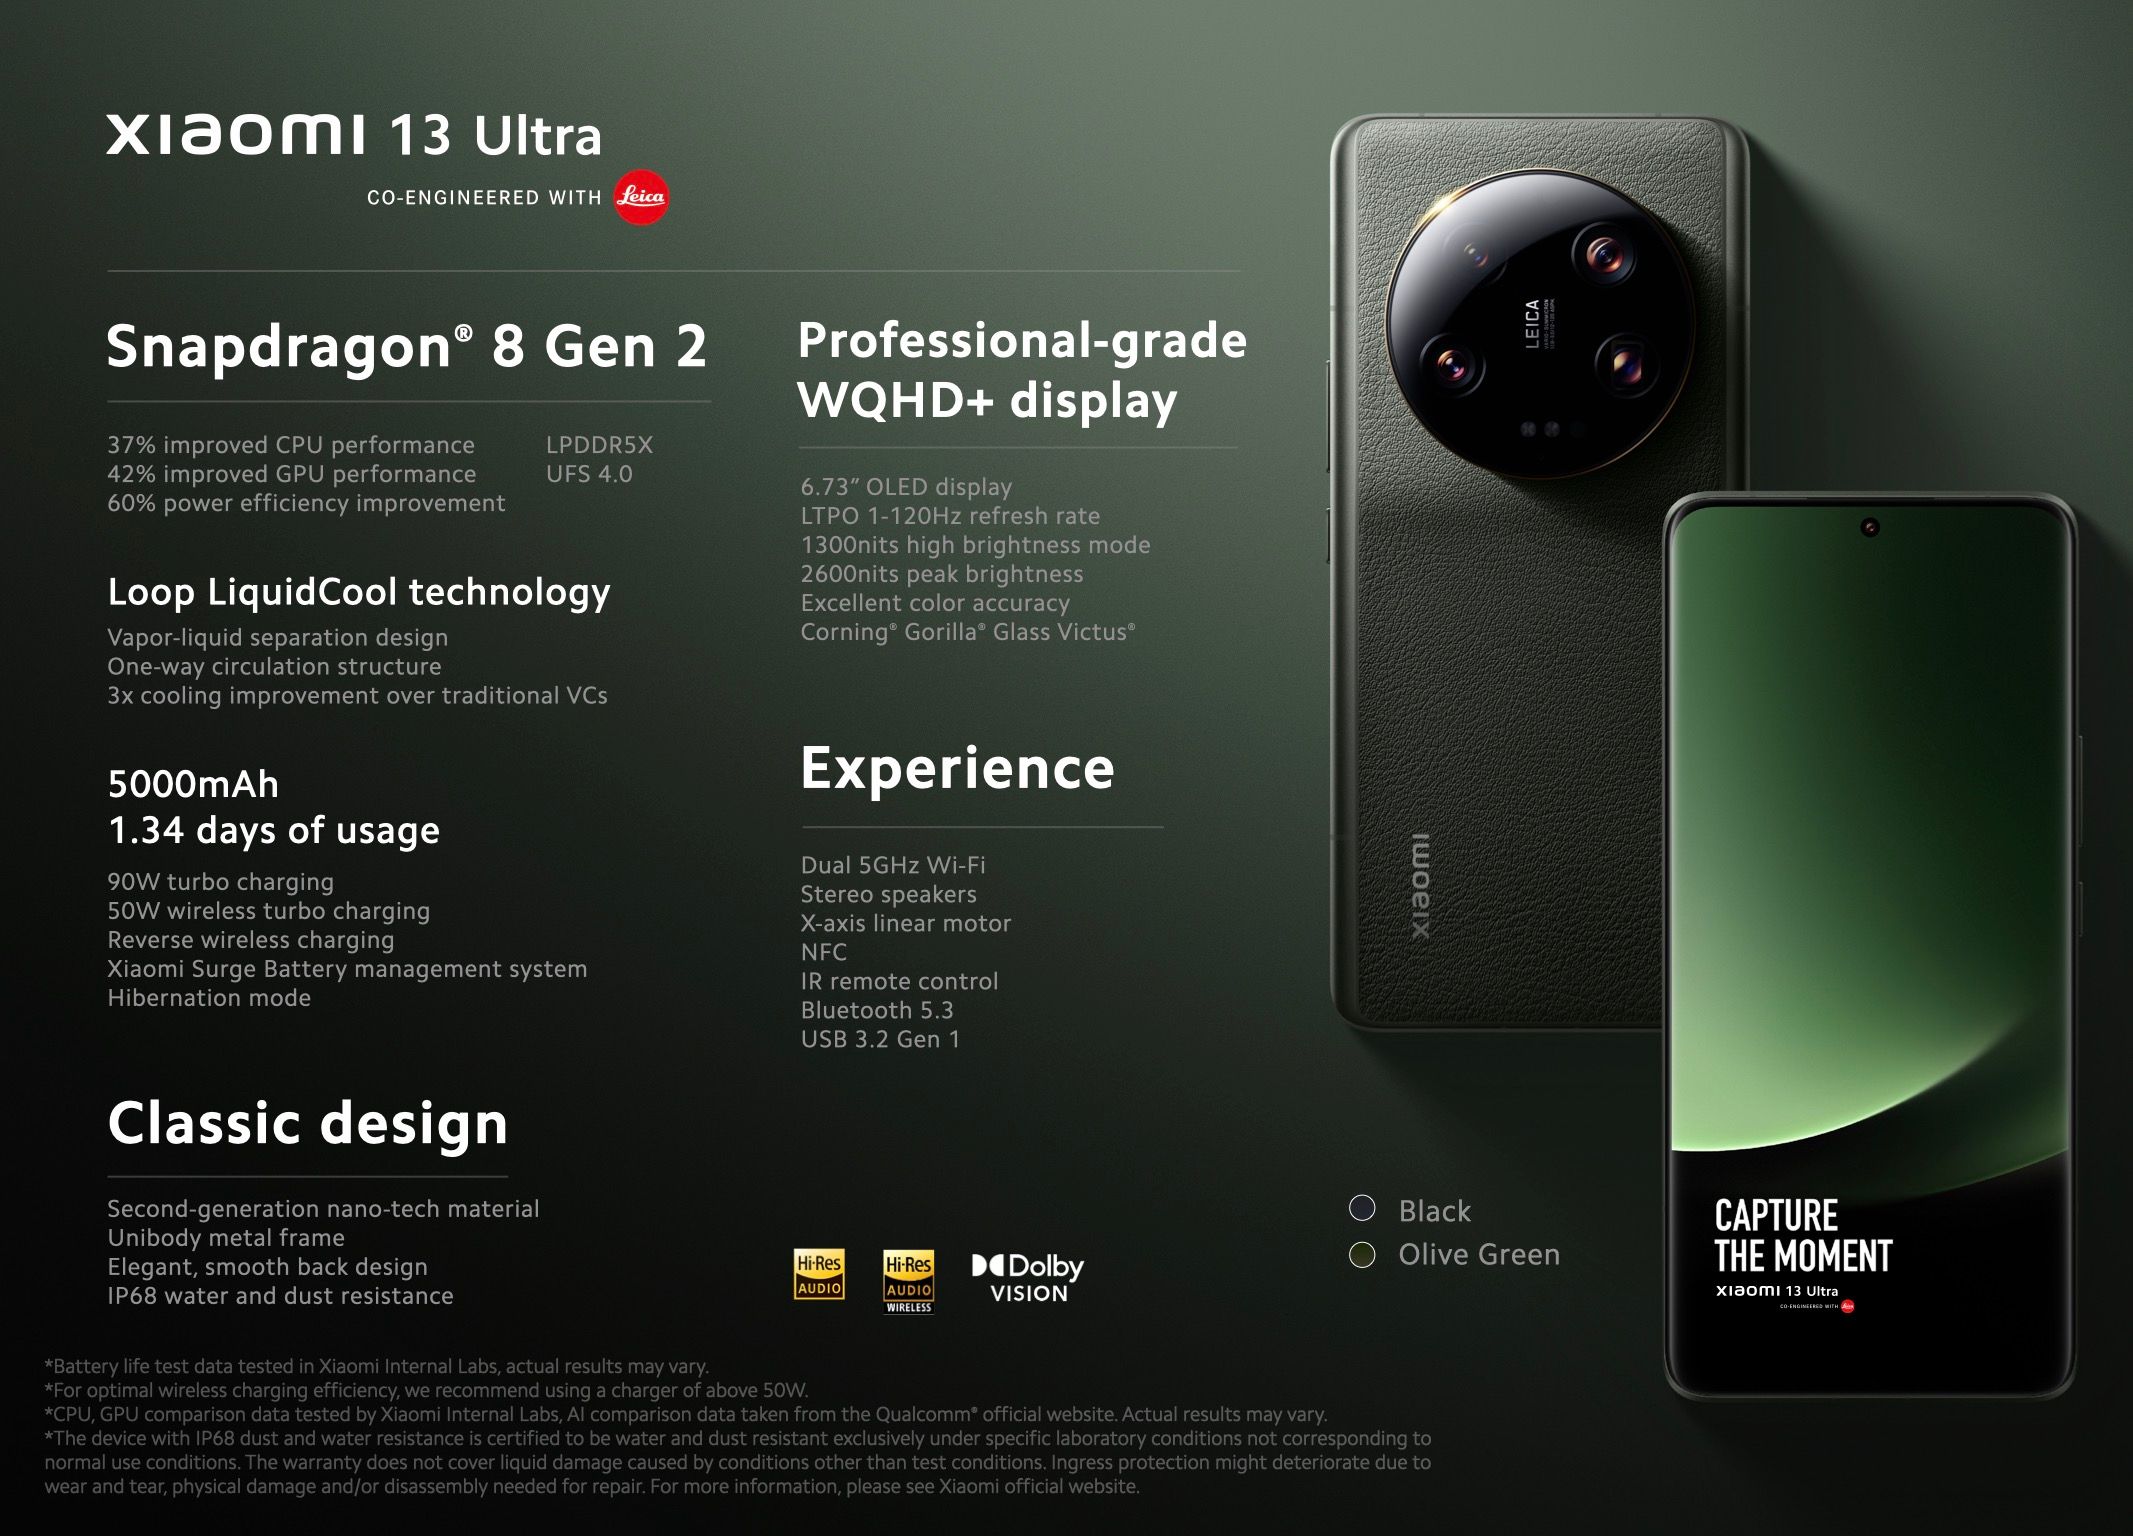 Xiaomi 13 Ultra leaked specs point to a strong camera setup